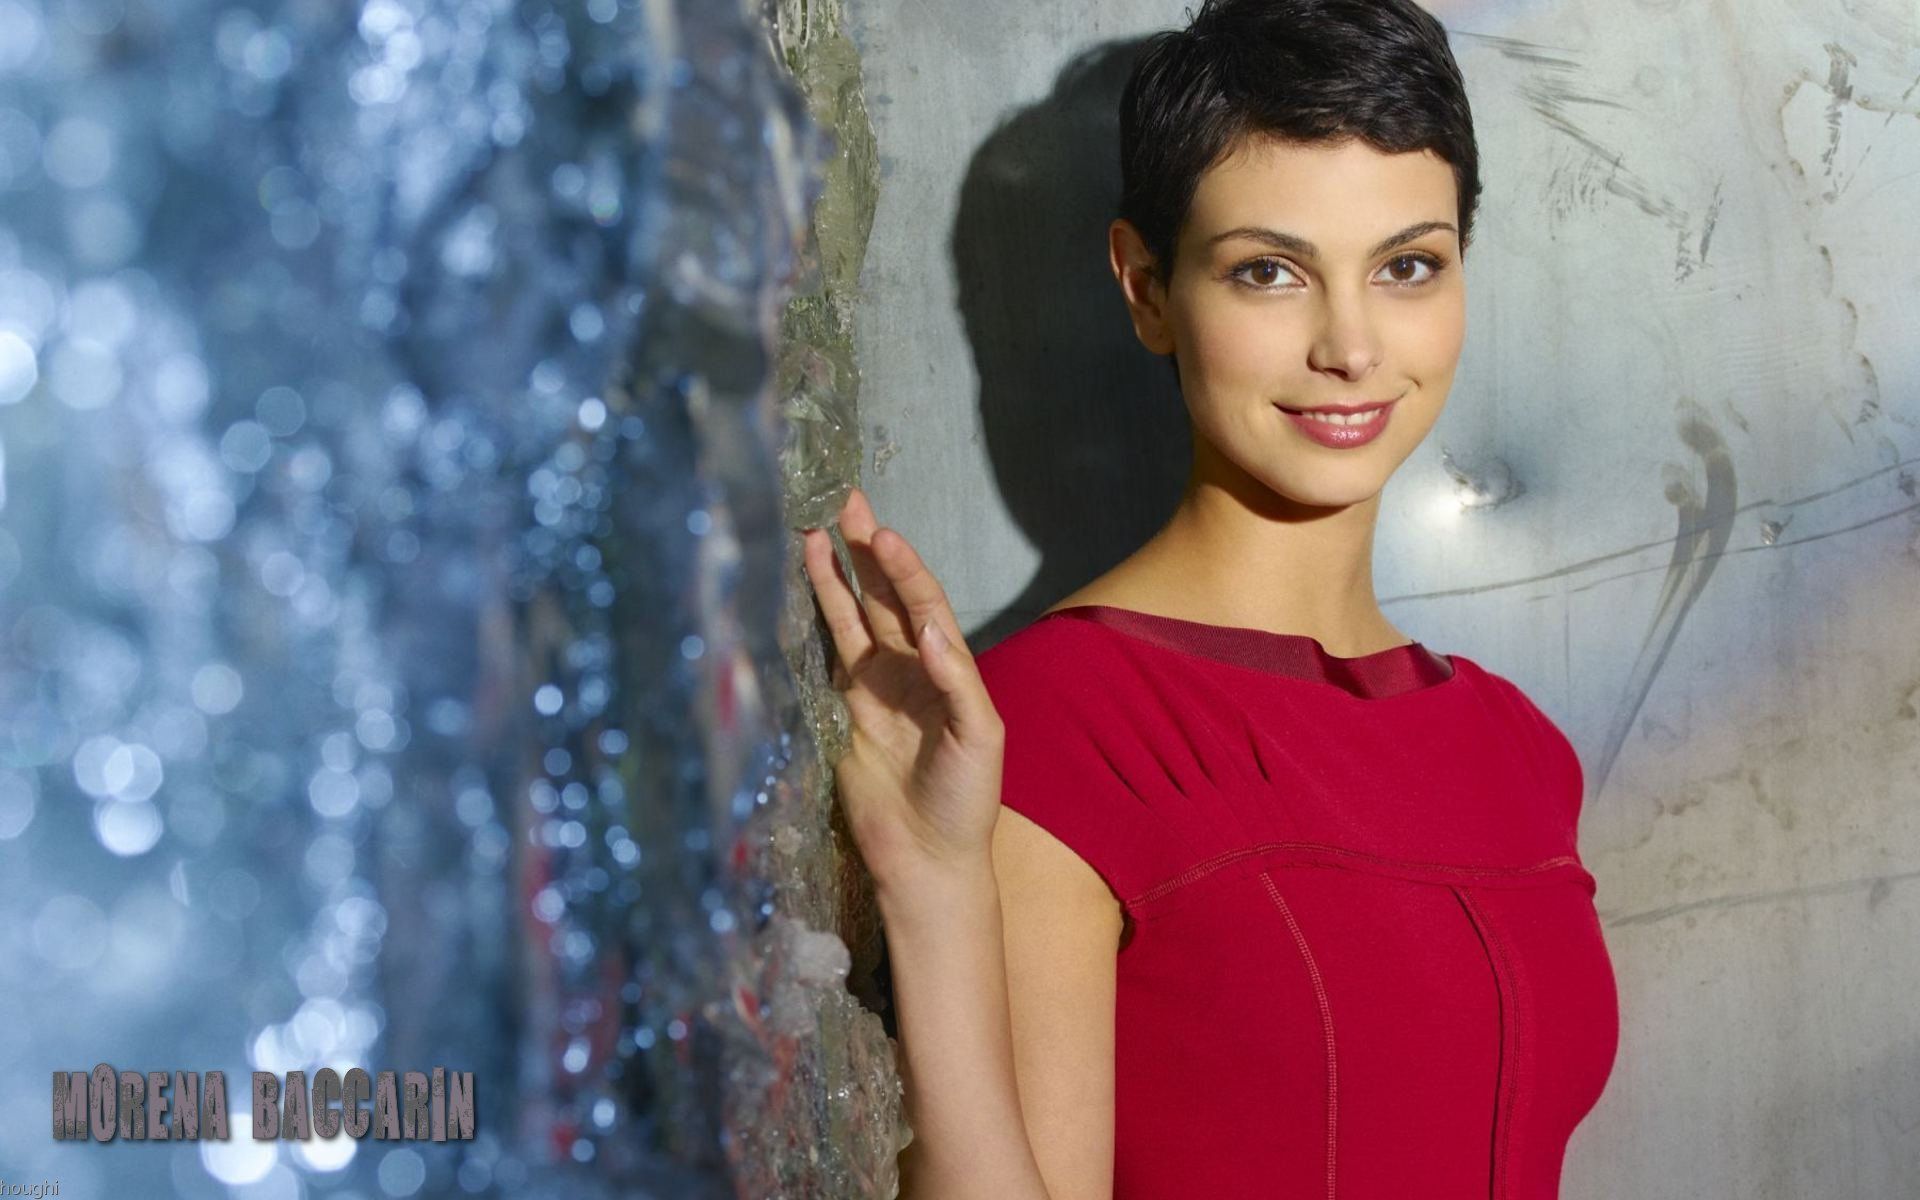 Morena Baccarin's quote #3